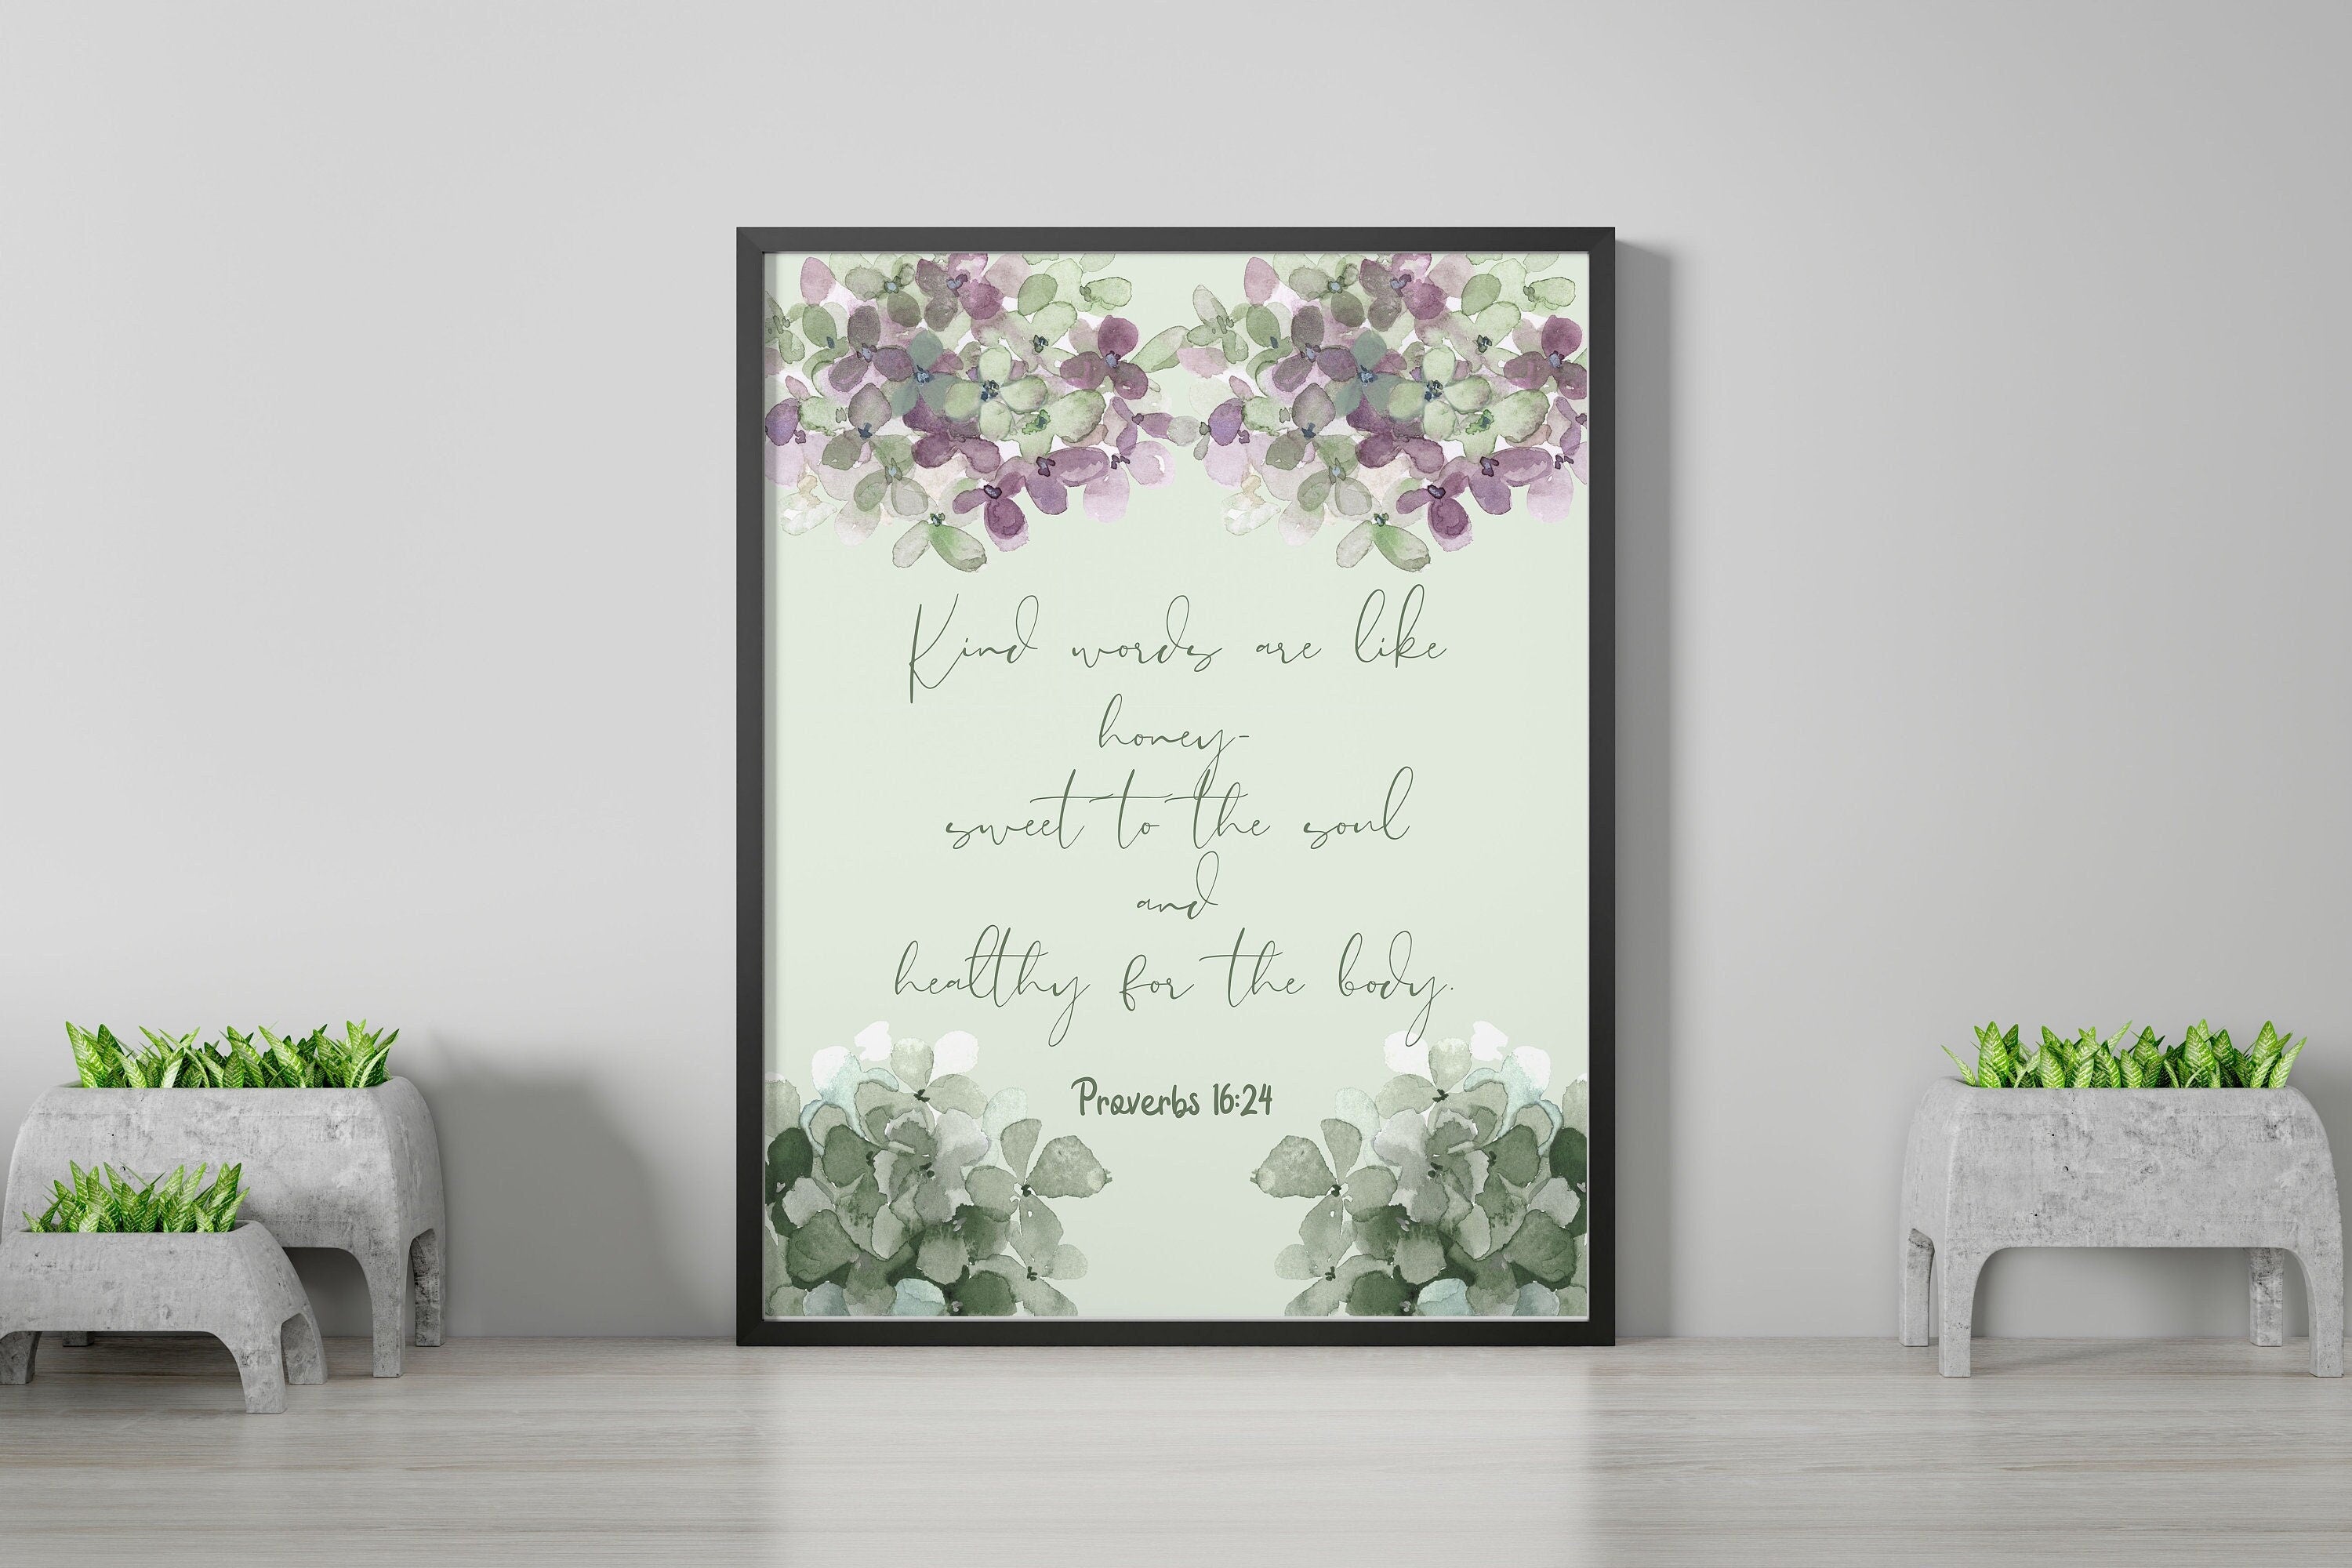 PROVERBS 16:24 Quote Print, Bible Verse Kind Words Are Like Honey Wall Art Print, Scripture Art Christian Gift